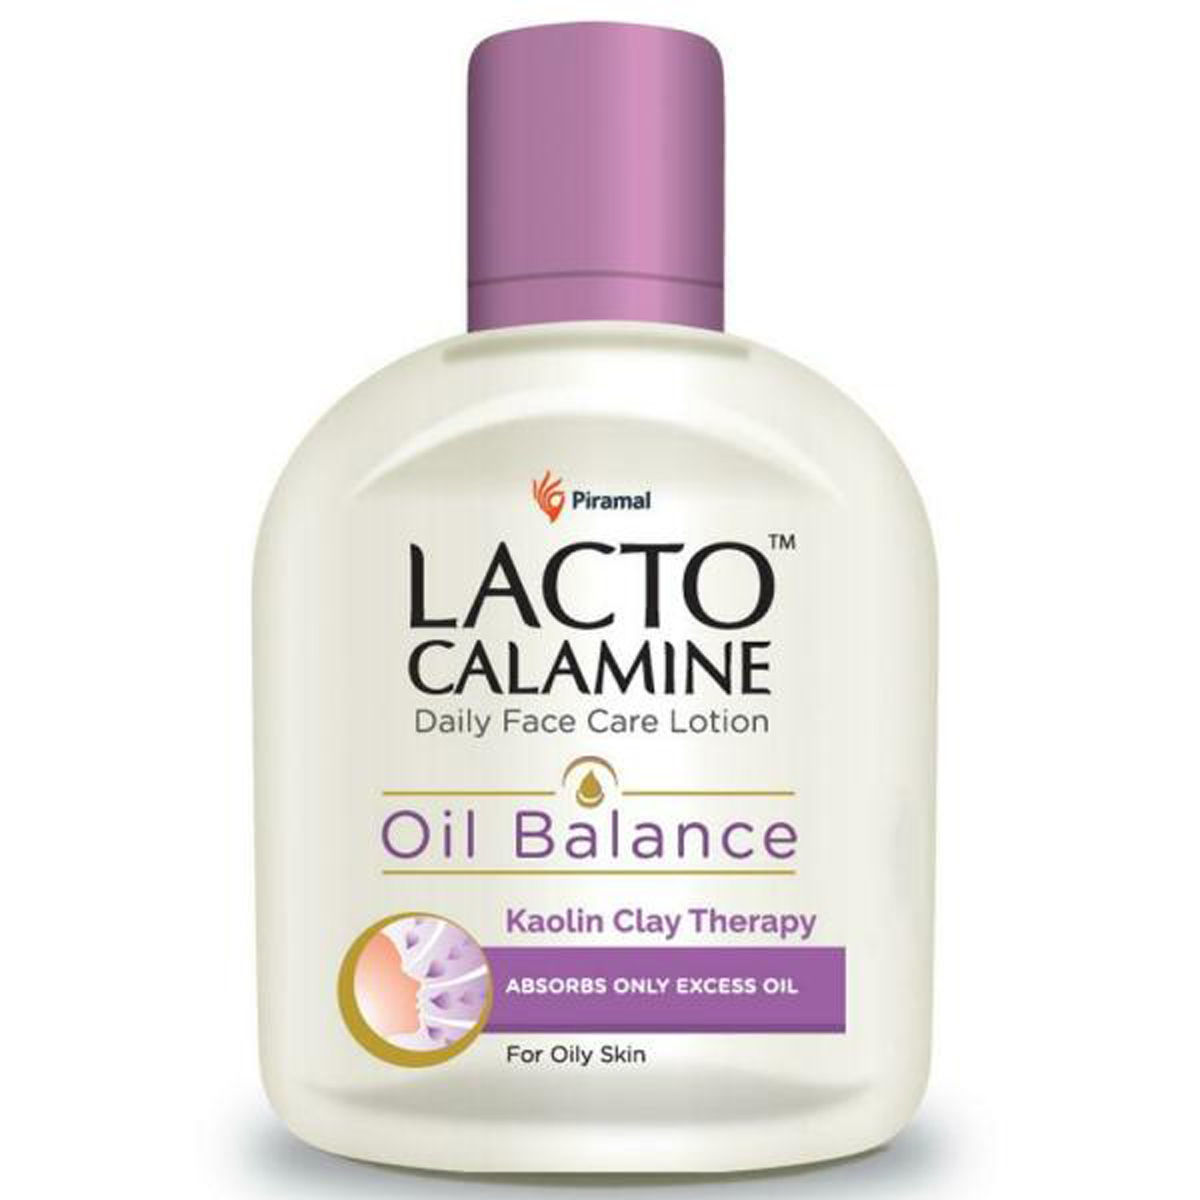 Lacto Calamine Oil Balance Daily Face Care Lotion for Oily Skin ...